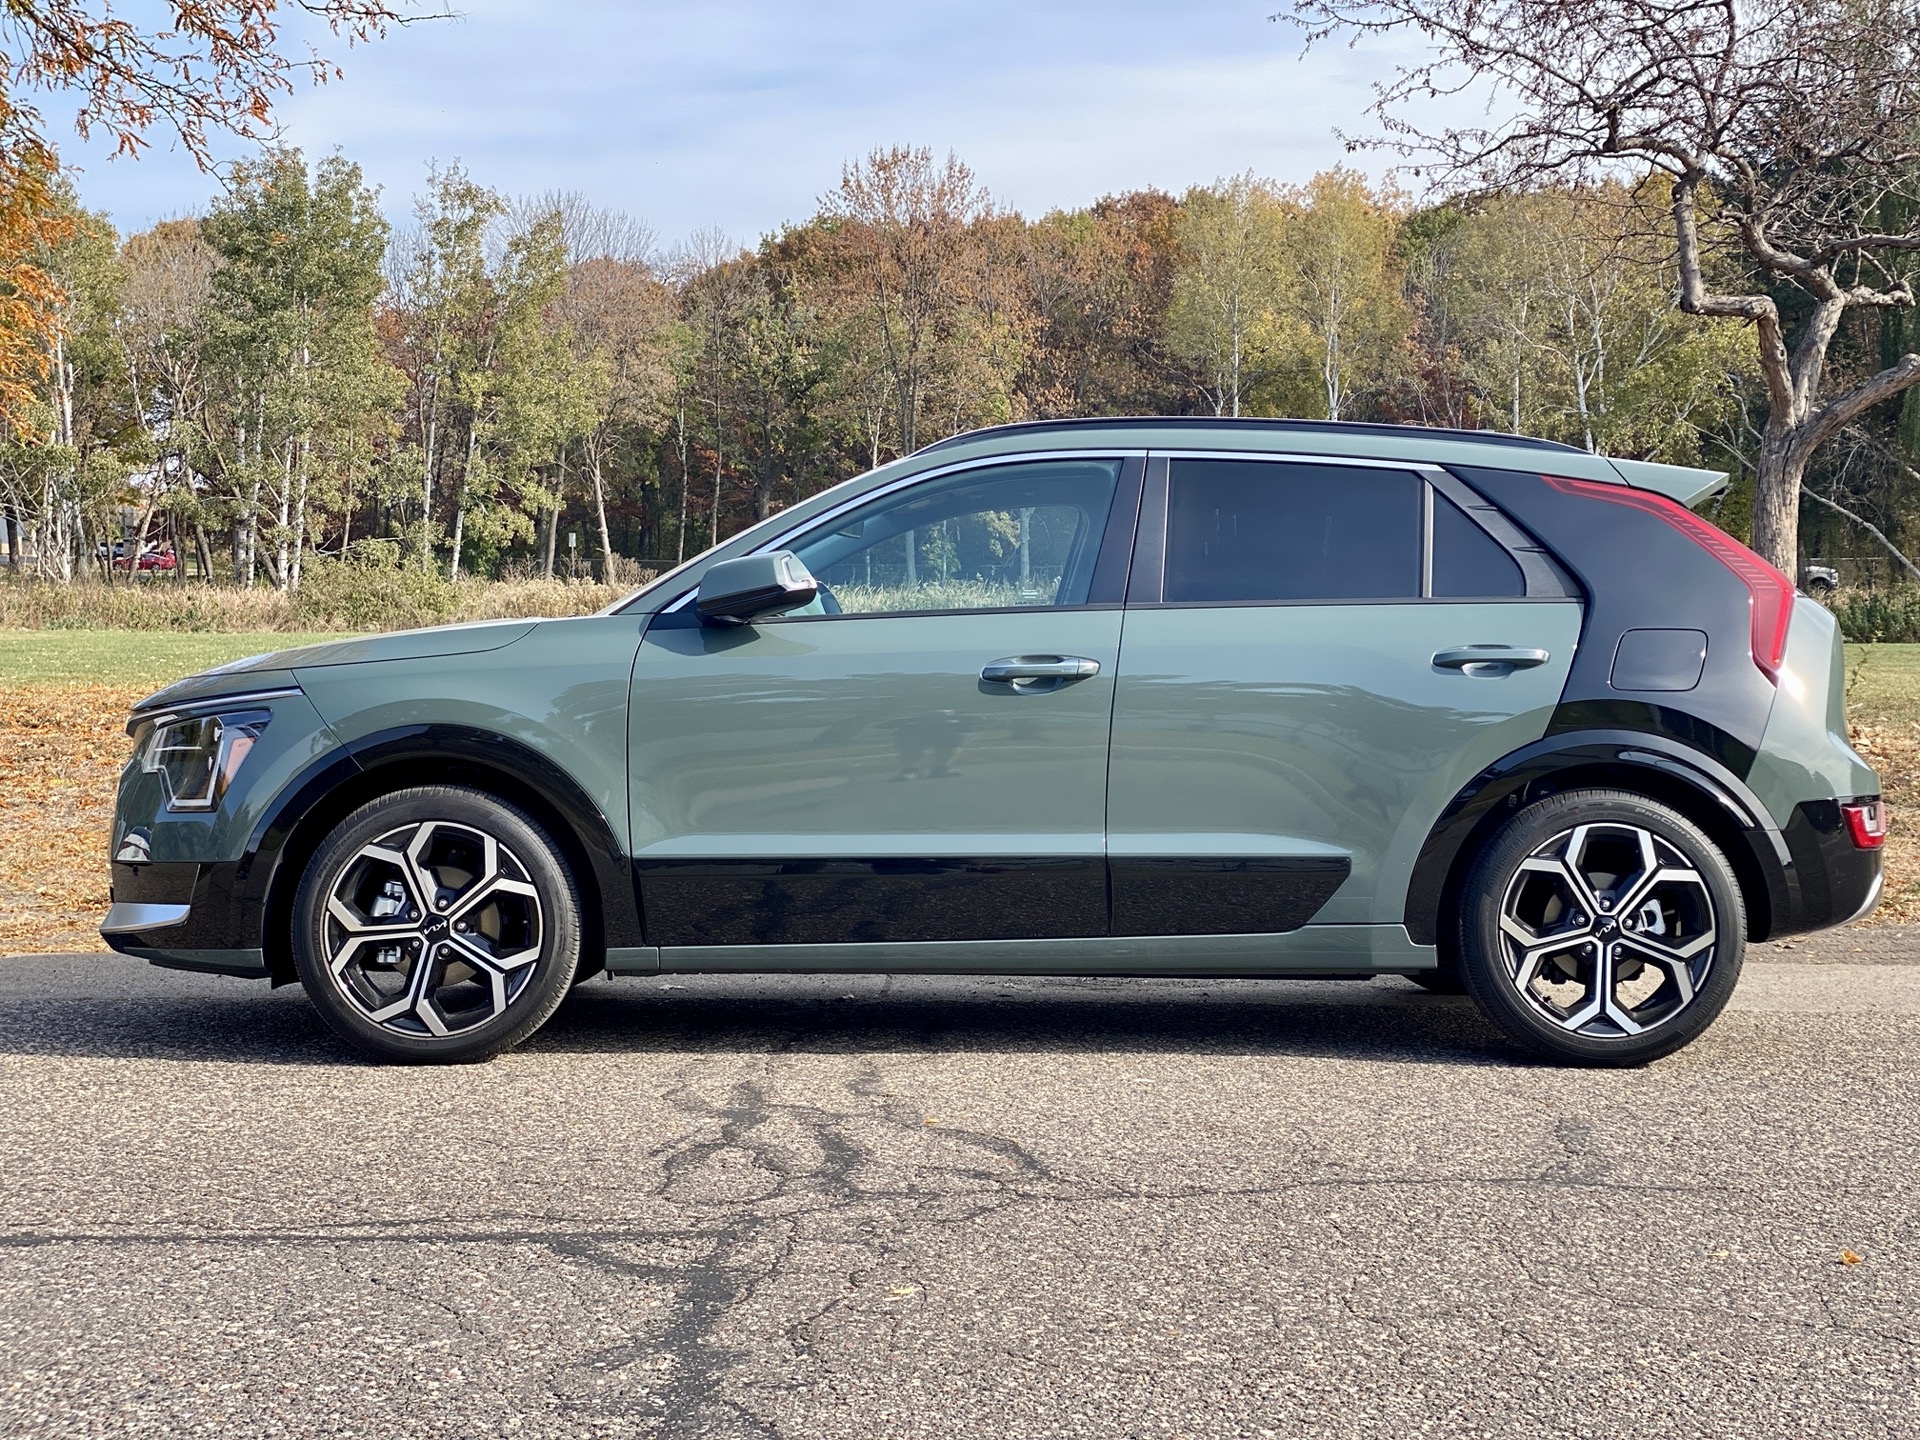 2023 Kia Niro blends crossover style and 49 mpg